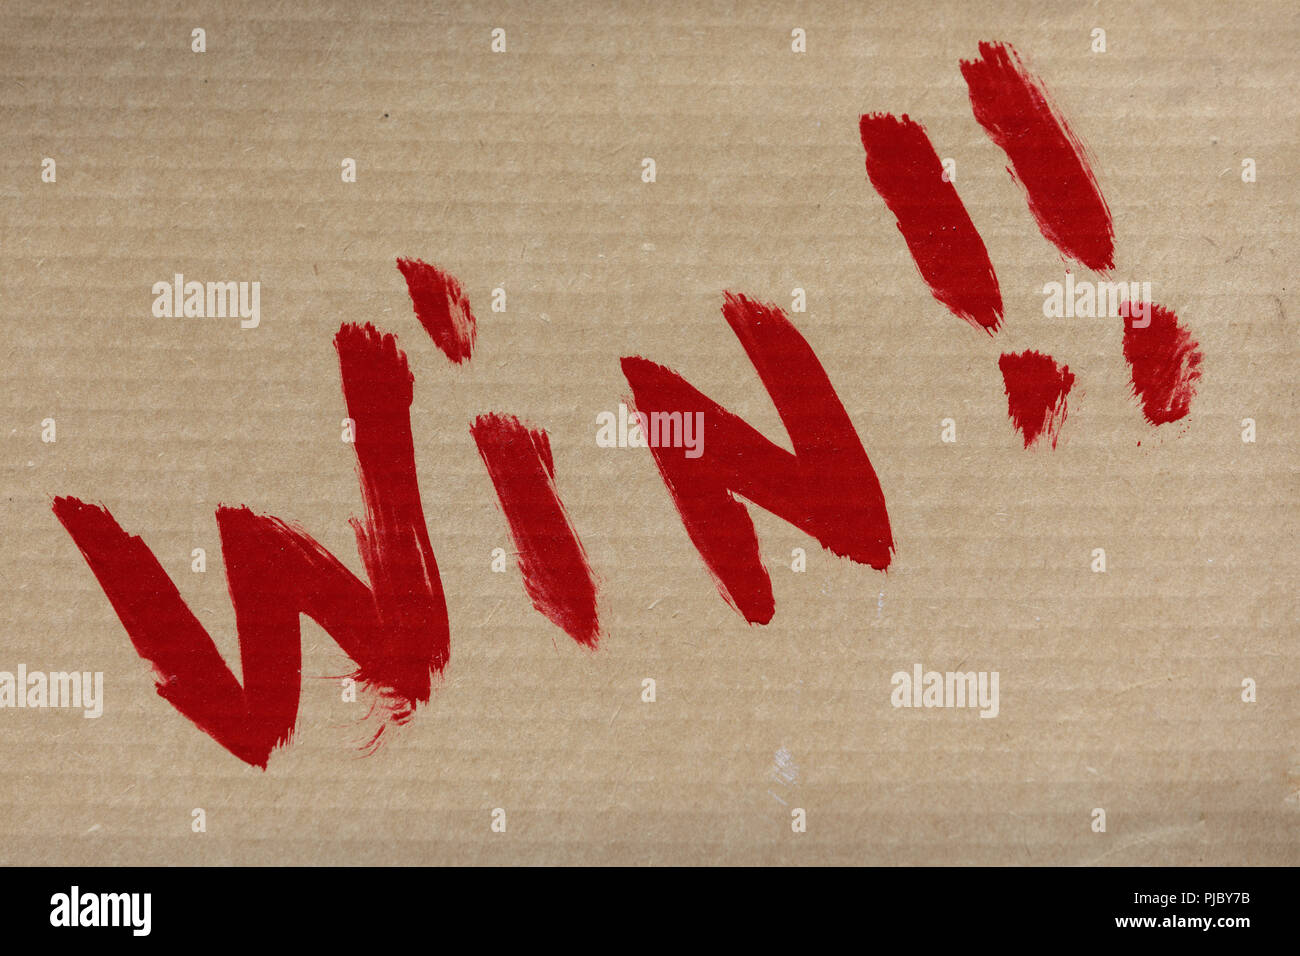 'Win!!' Hand painted sign in red on cardboard. Stock Photo